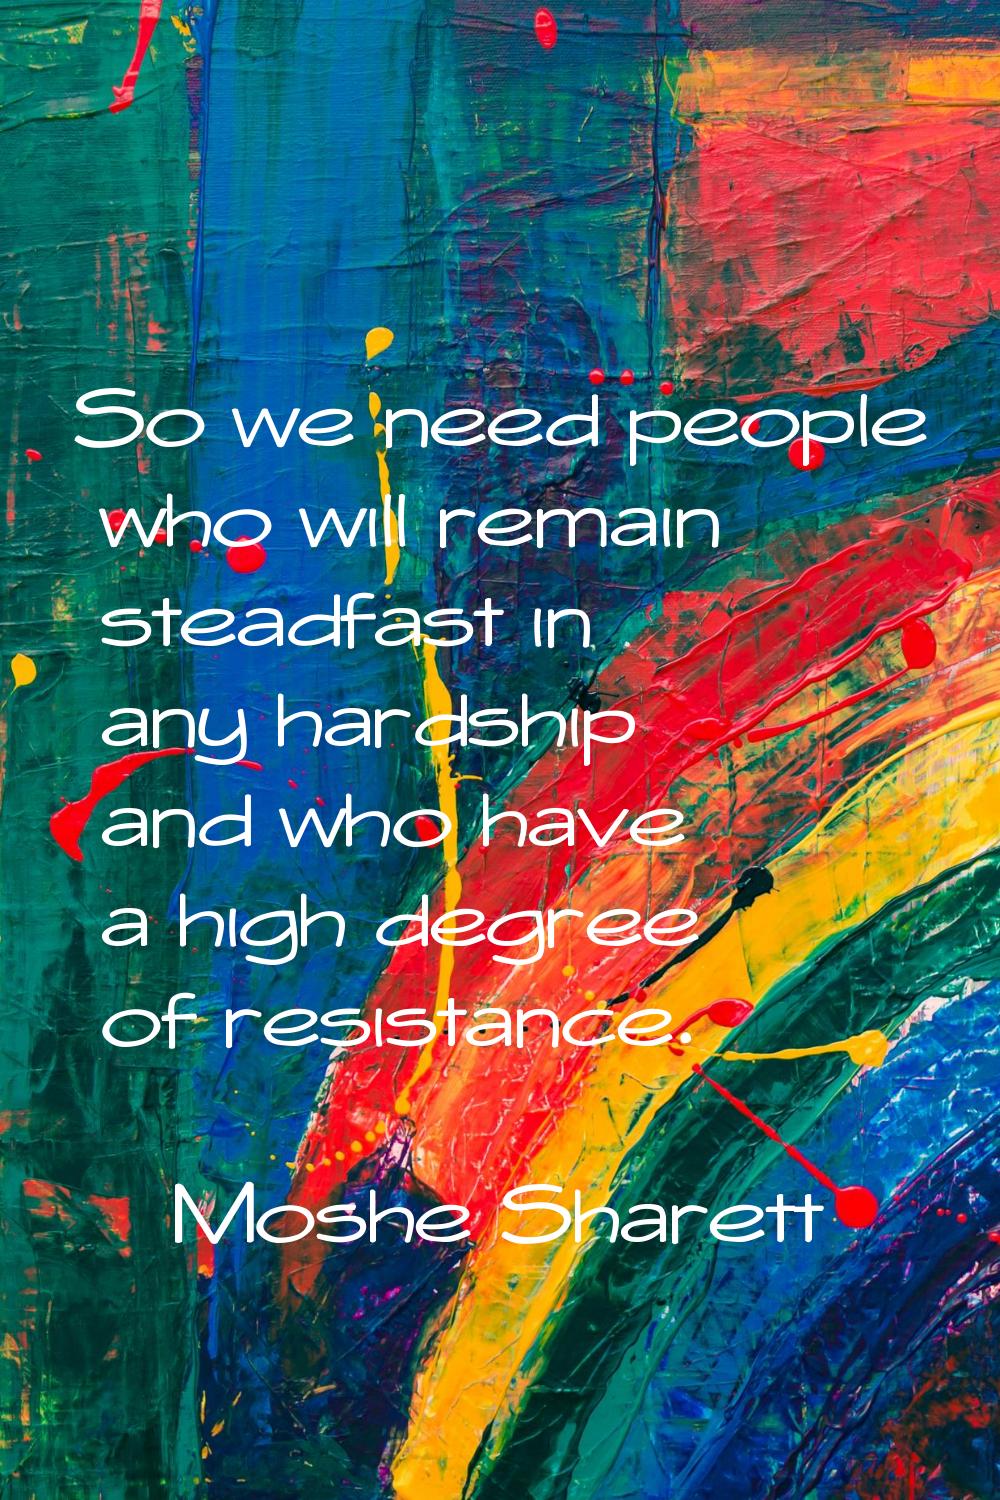 So we need people who will remain steadfast in any hardship and who have a high degree of resistanc